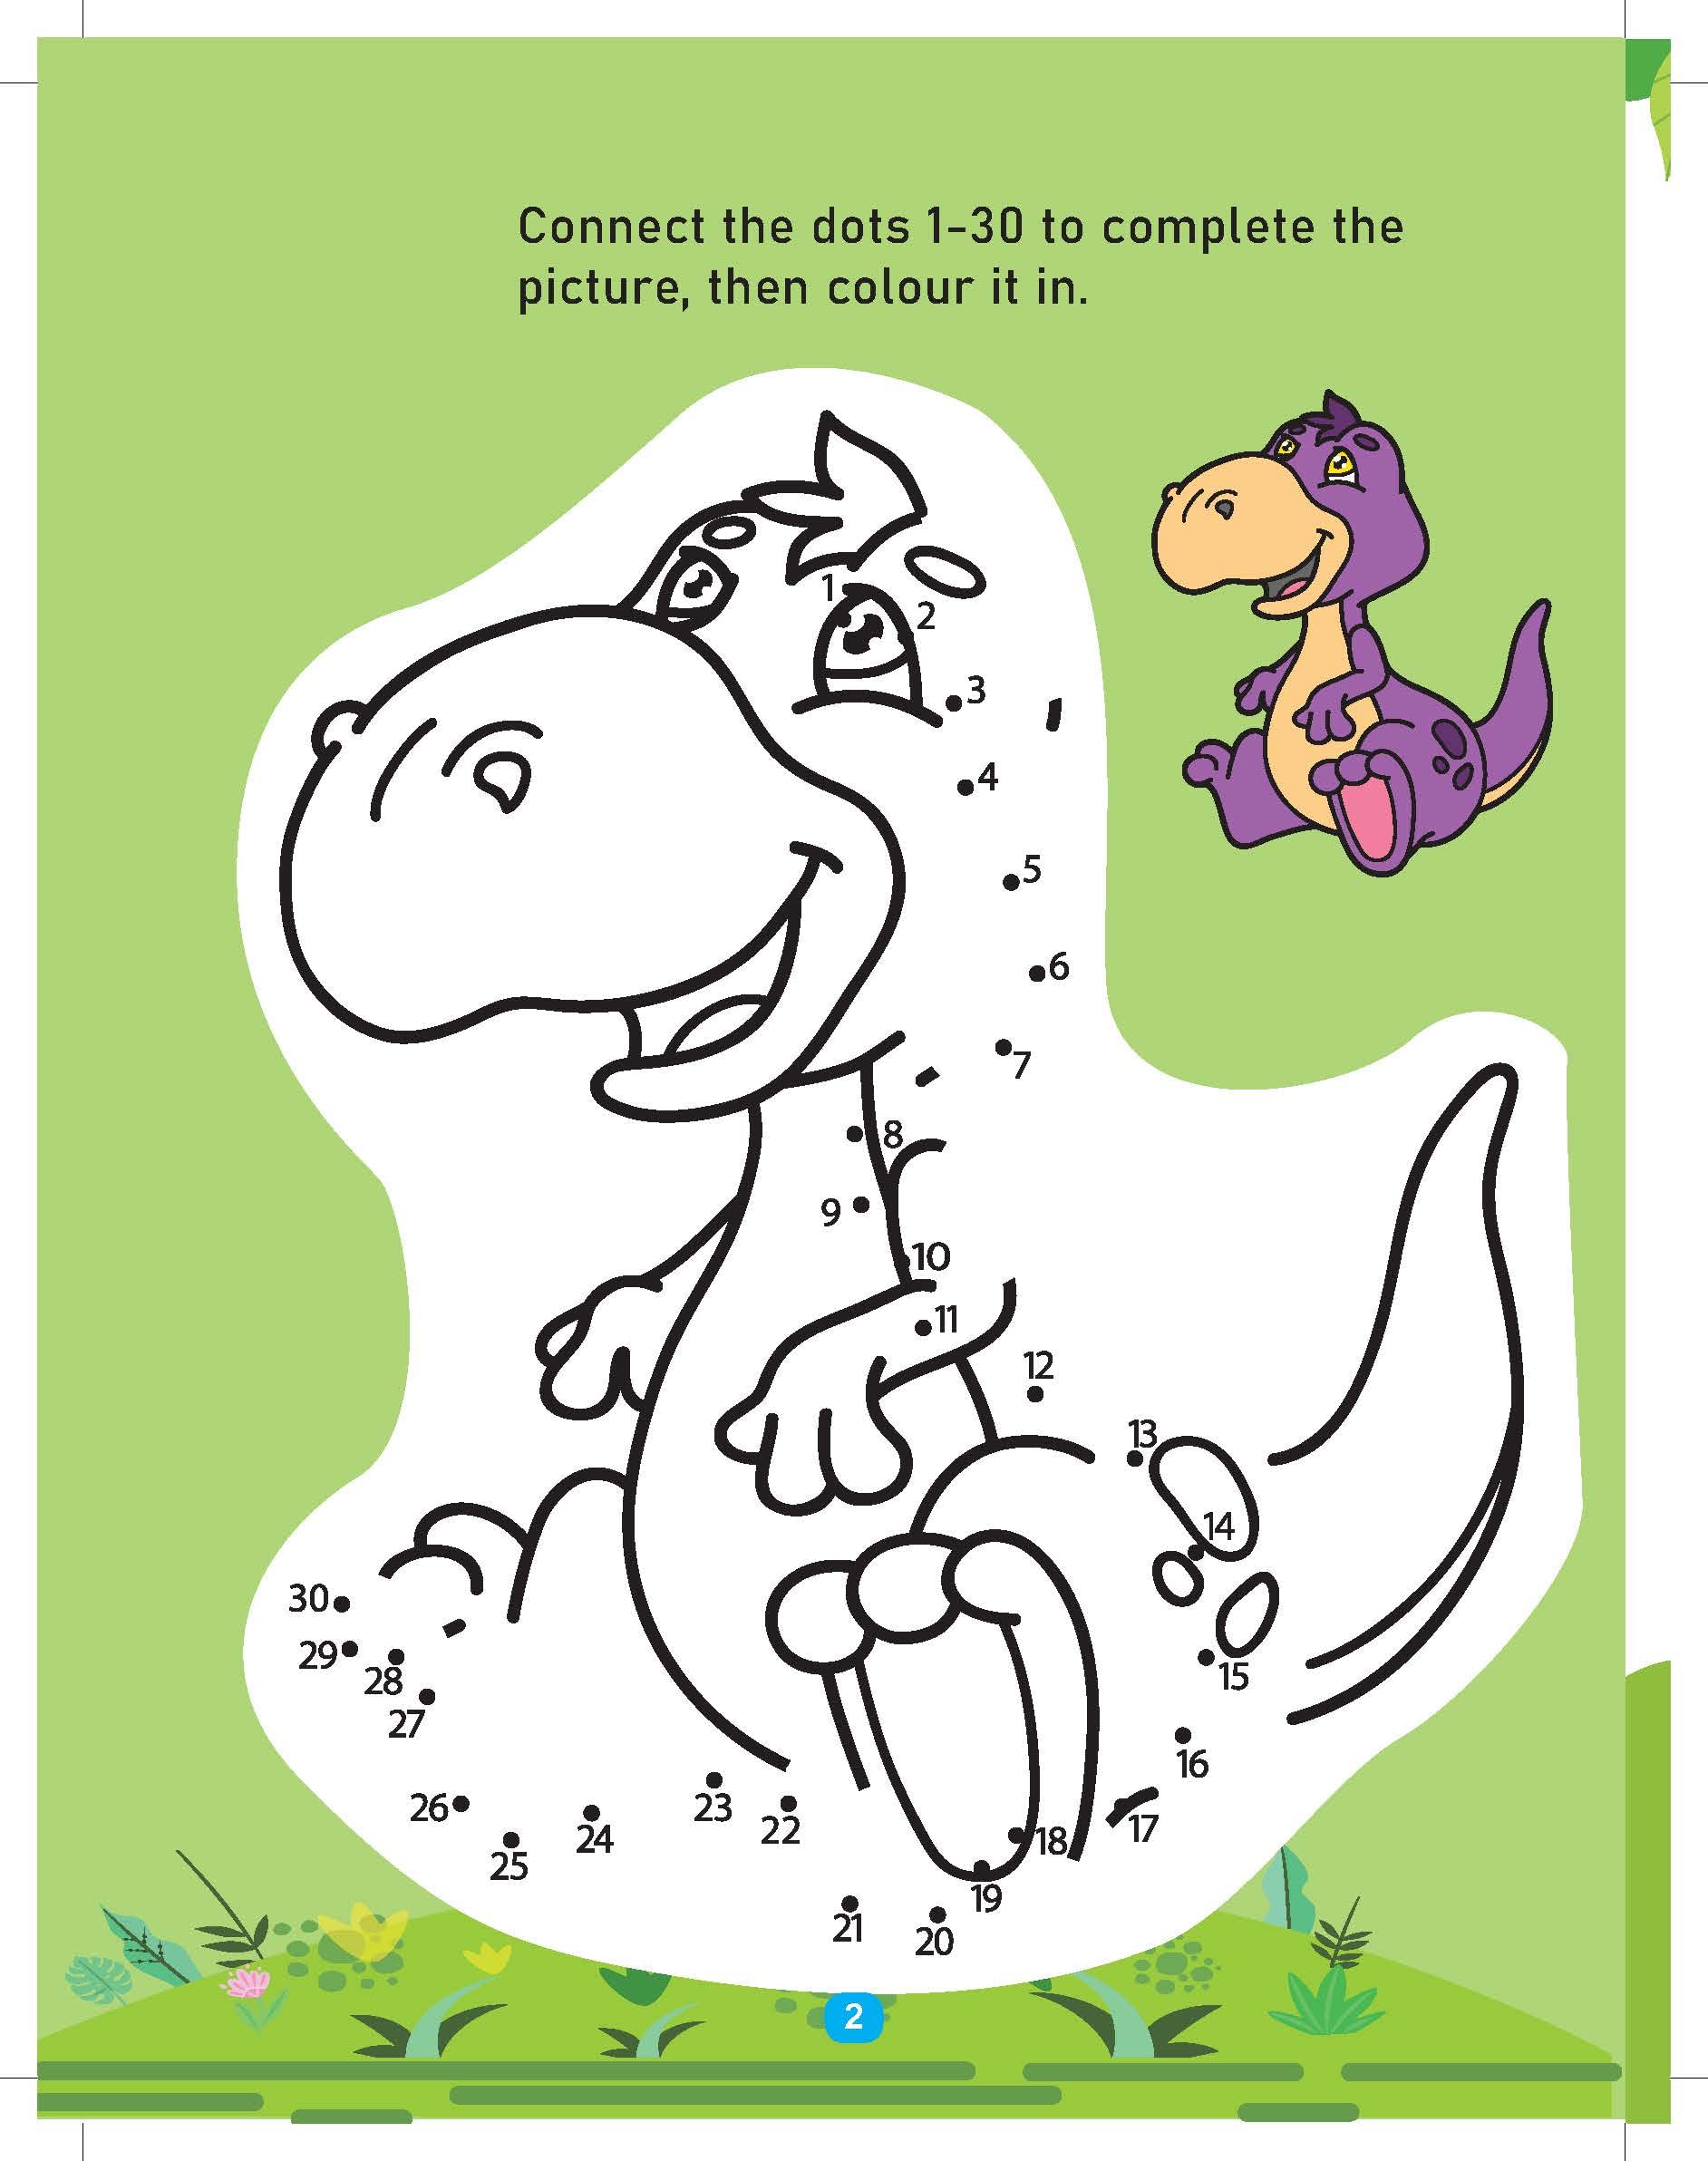 Dreamland Dinosaur Activity and Colouring - An Activity Book for Kids Ages 2+